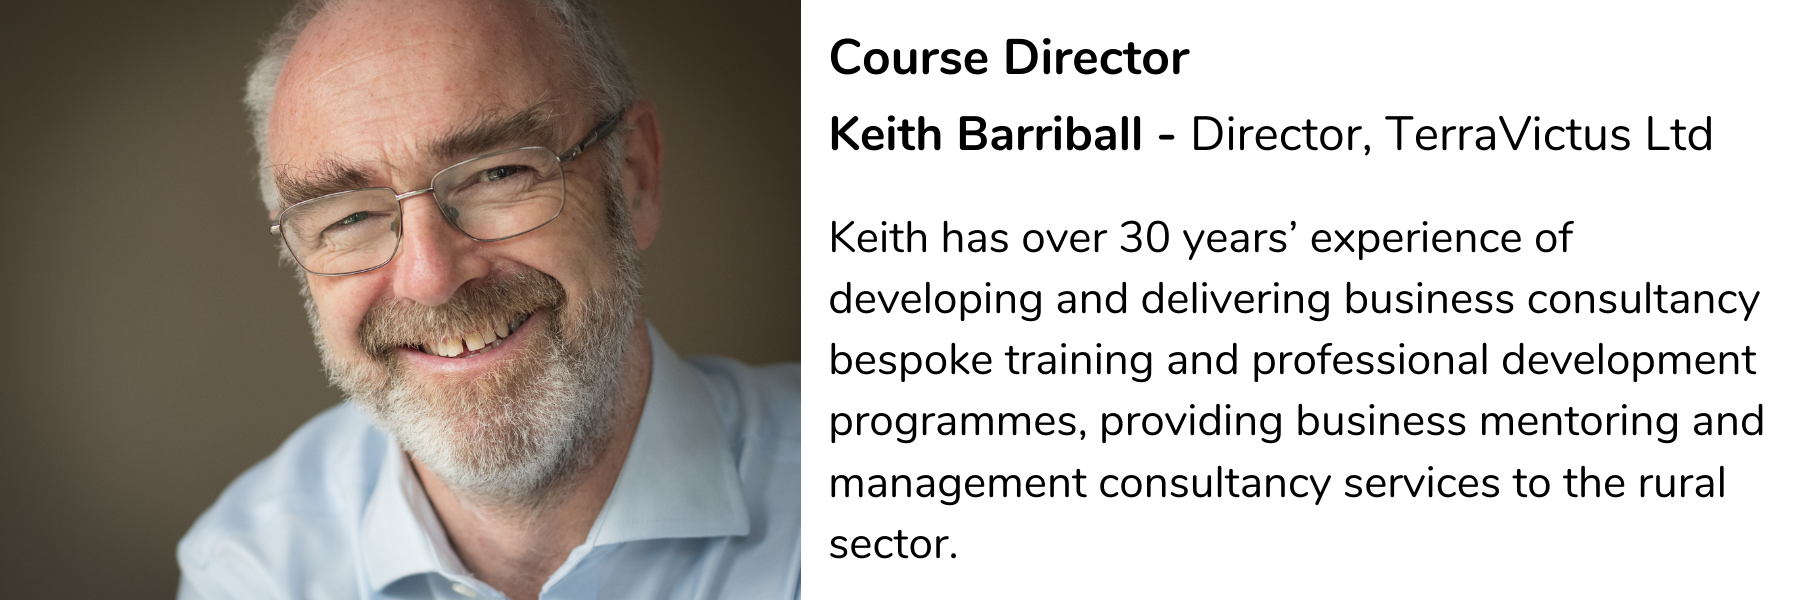 Course director Keith Barriball, director Terravictus ltd. Keith has over 30 years' experience of developing and delivering business consultancy bespoke training and professional development programmes, providing business mentoring and management consultancy services to the rural sector